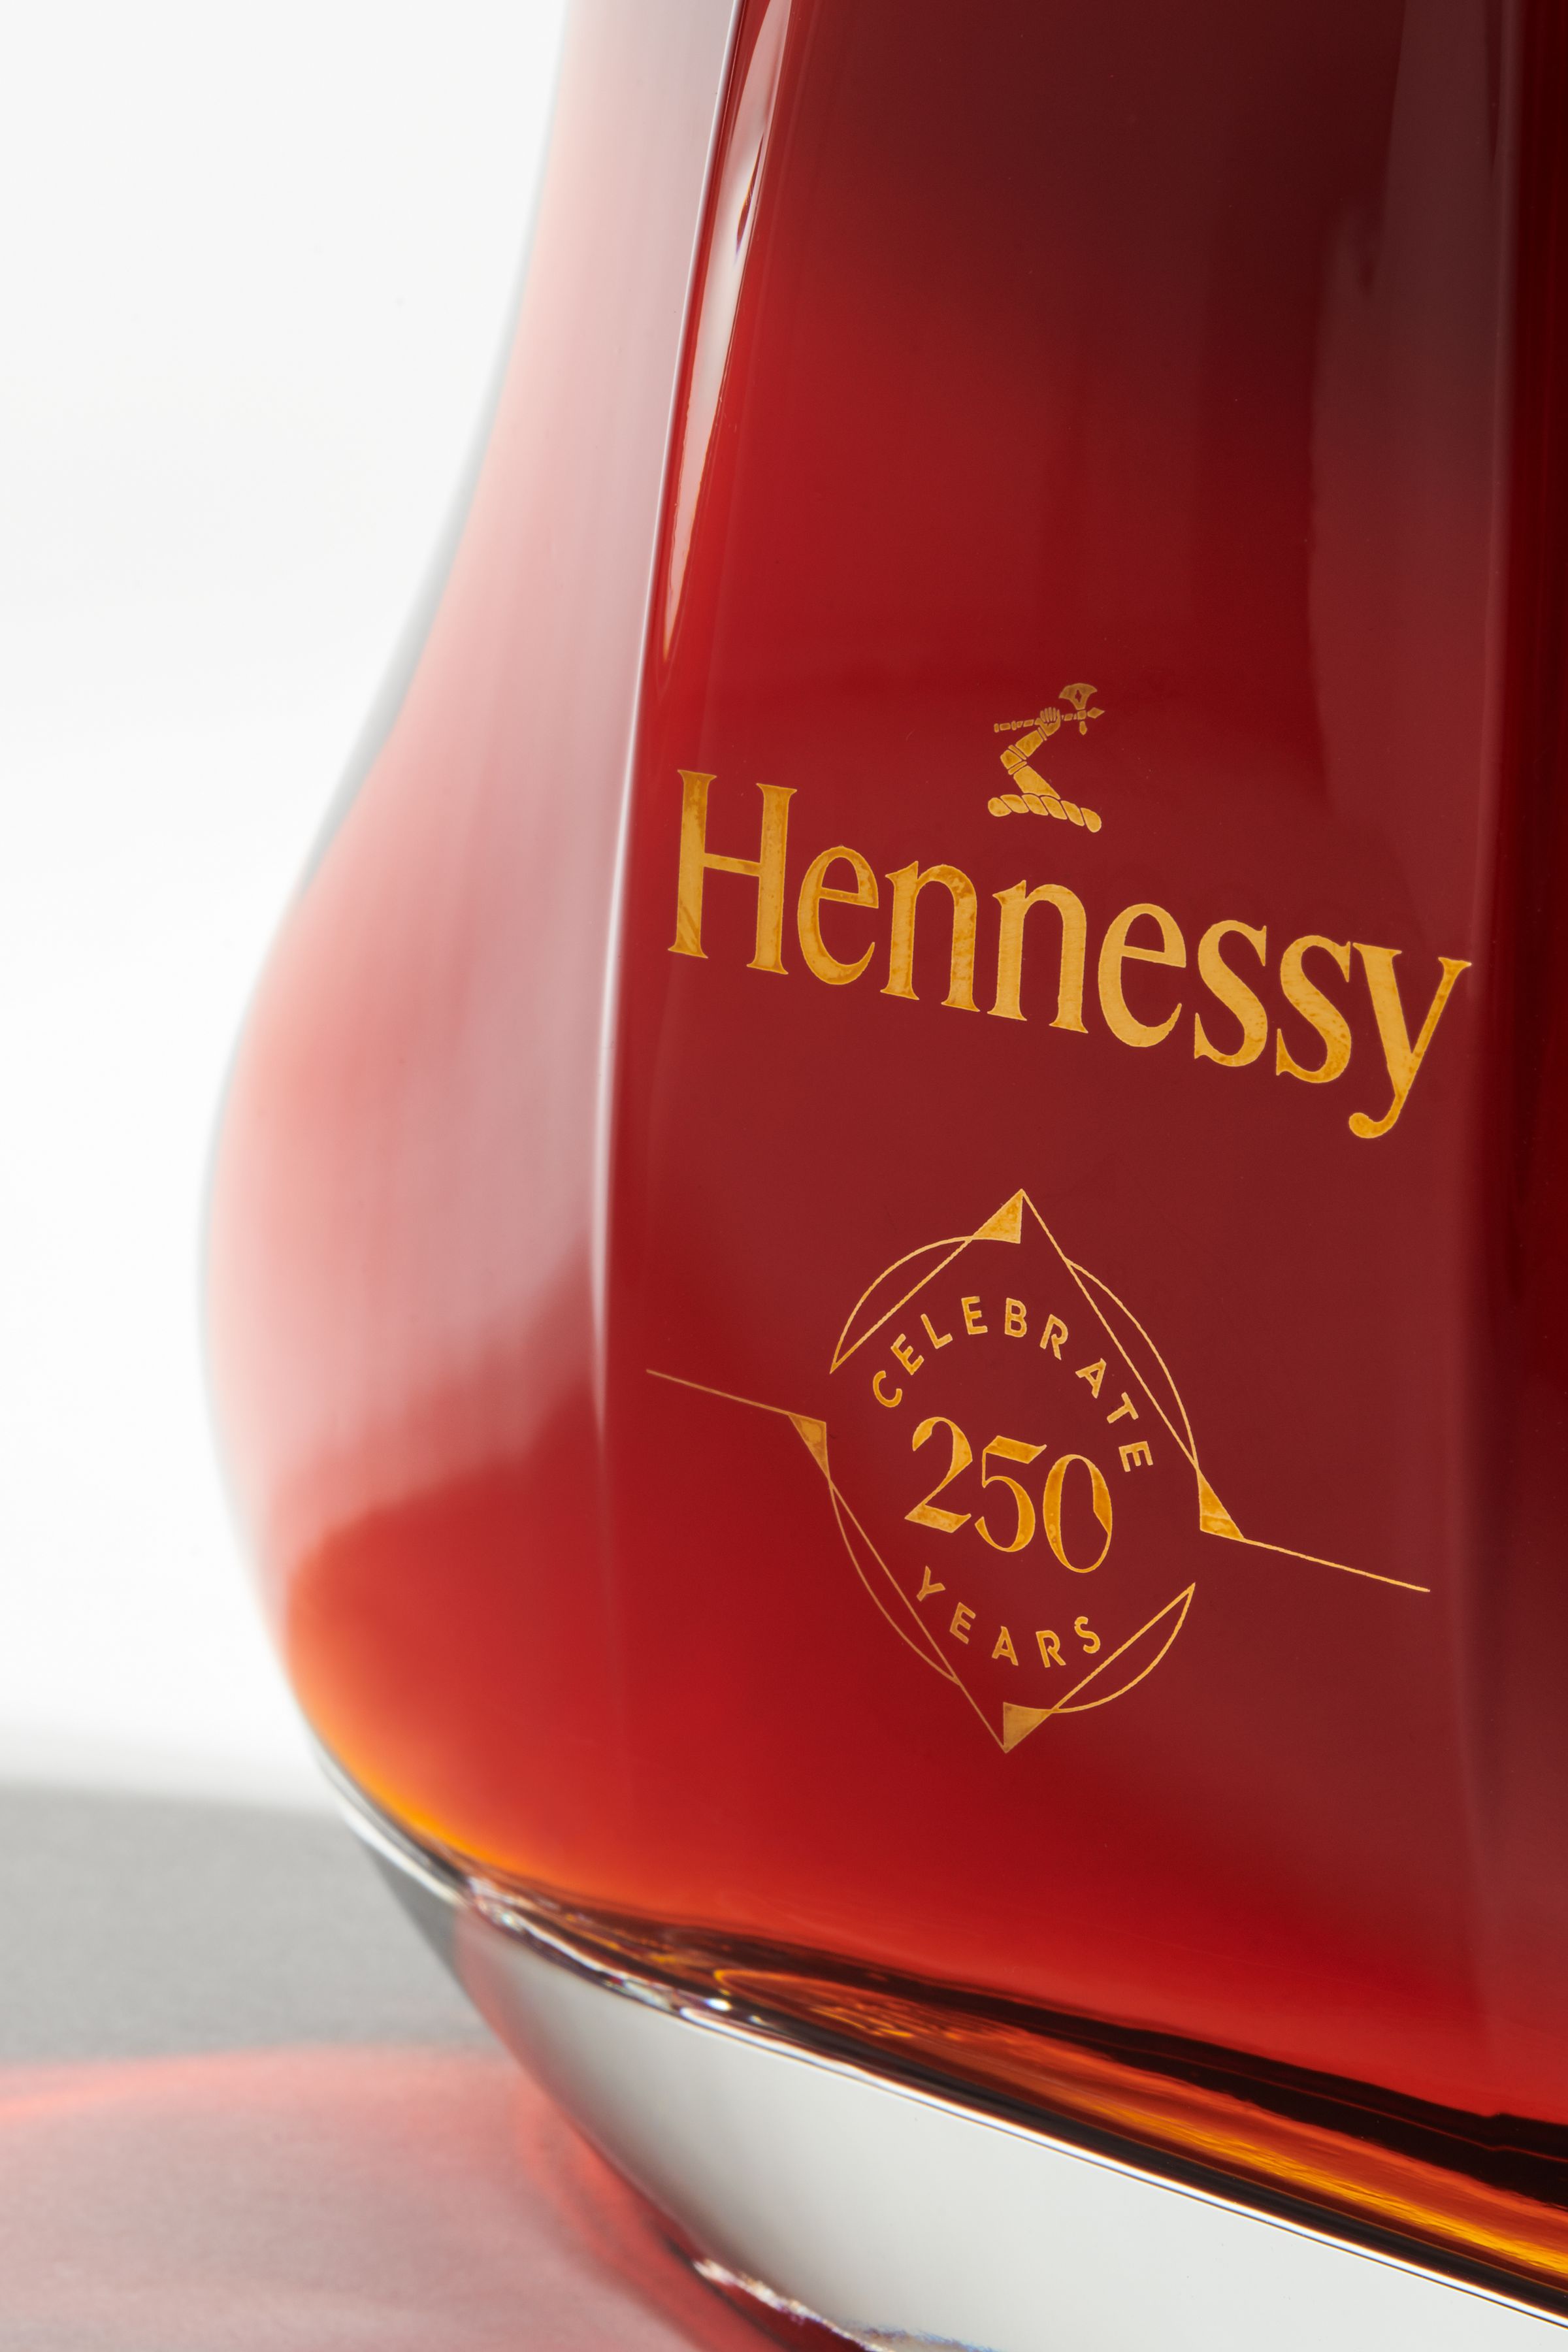 Hennessy 250 anniversary collector's blend logo applied to bottle